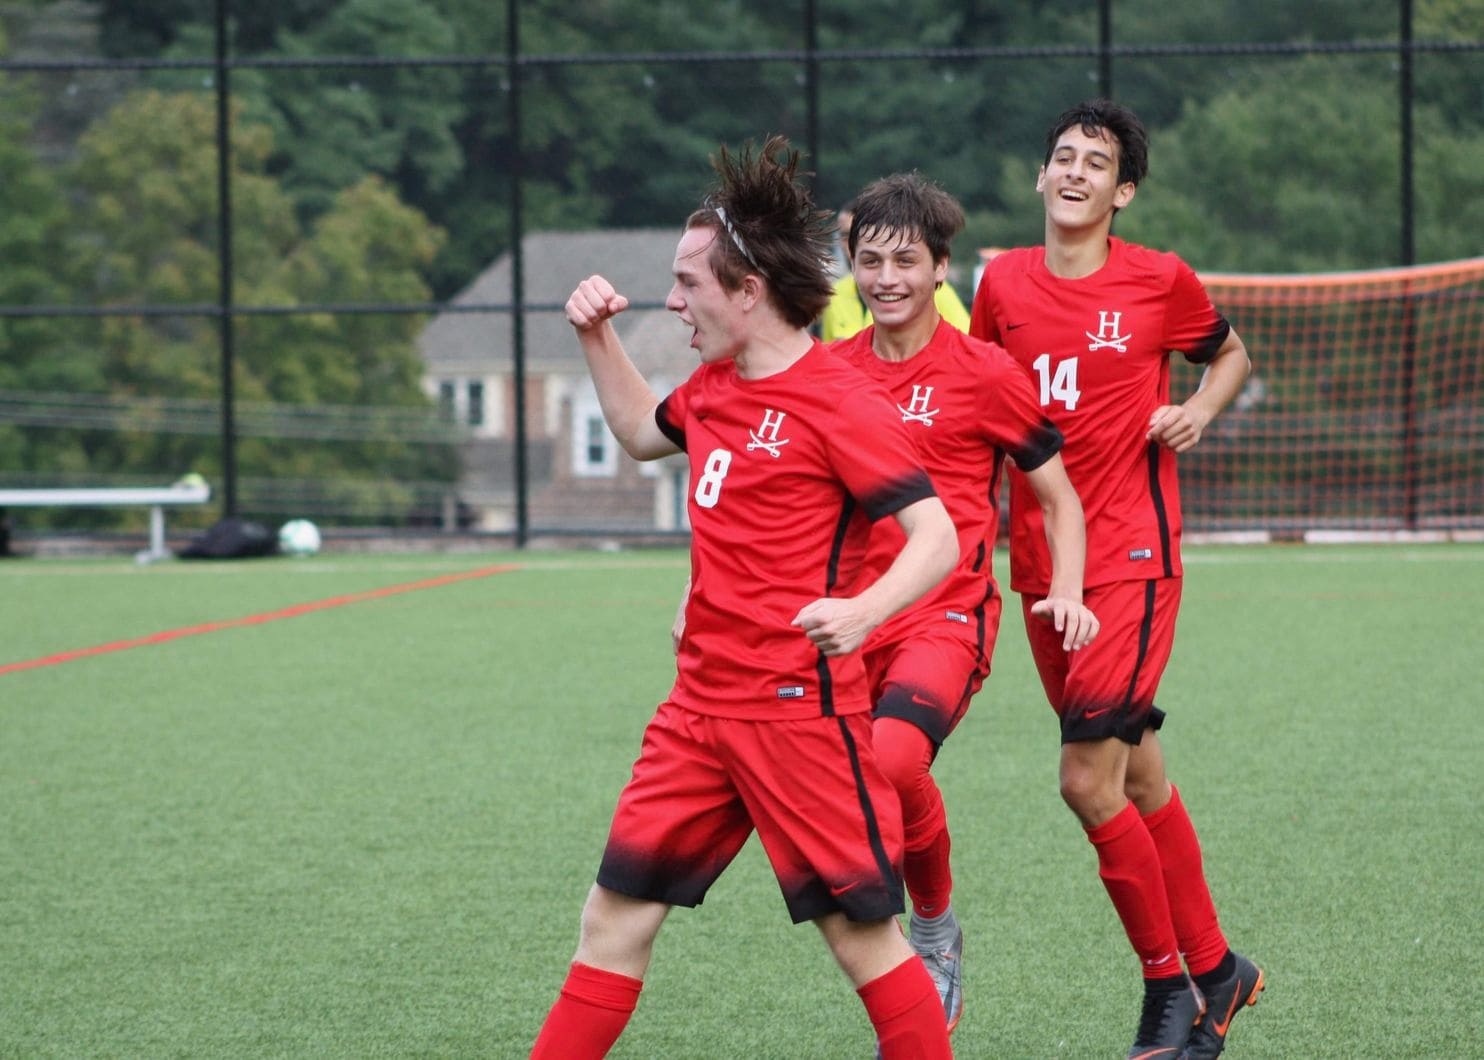 Boys’ soccer Top 10: The Heights is ready to chase a championship as new members of the WCAC